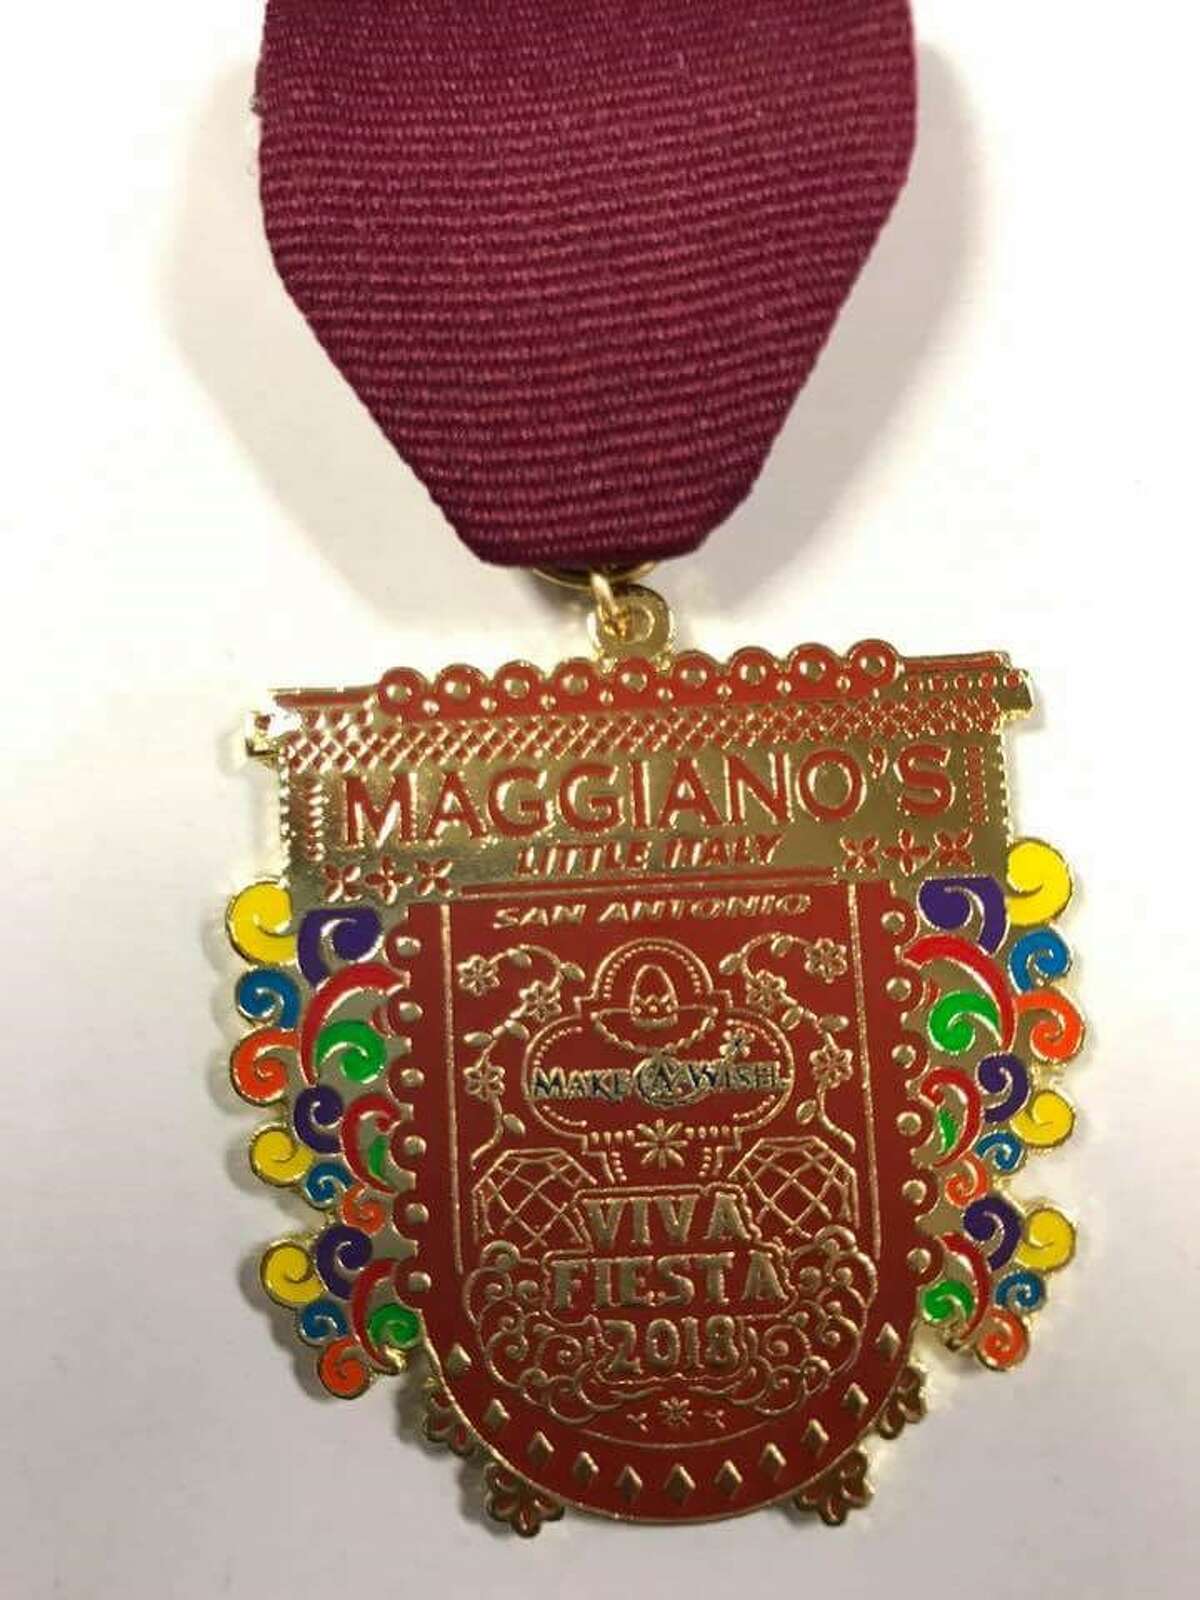 Maggiano's Little Italy is one of the first companies to have a medal completed already. Eddie Ortiz, maitre d' of the 17603 Interstate 10 location, worked with his friend Martin Salazar to create next year's medal which is already going for $20.